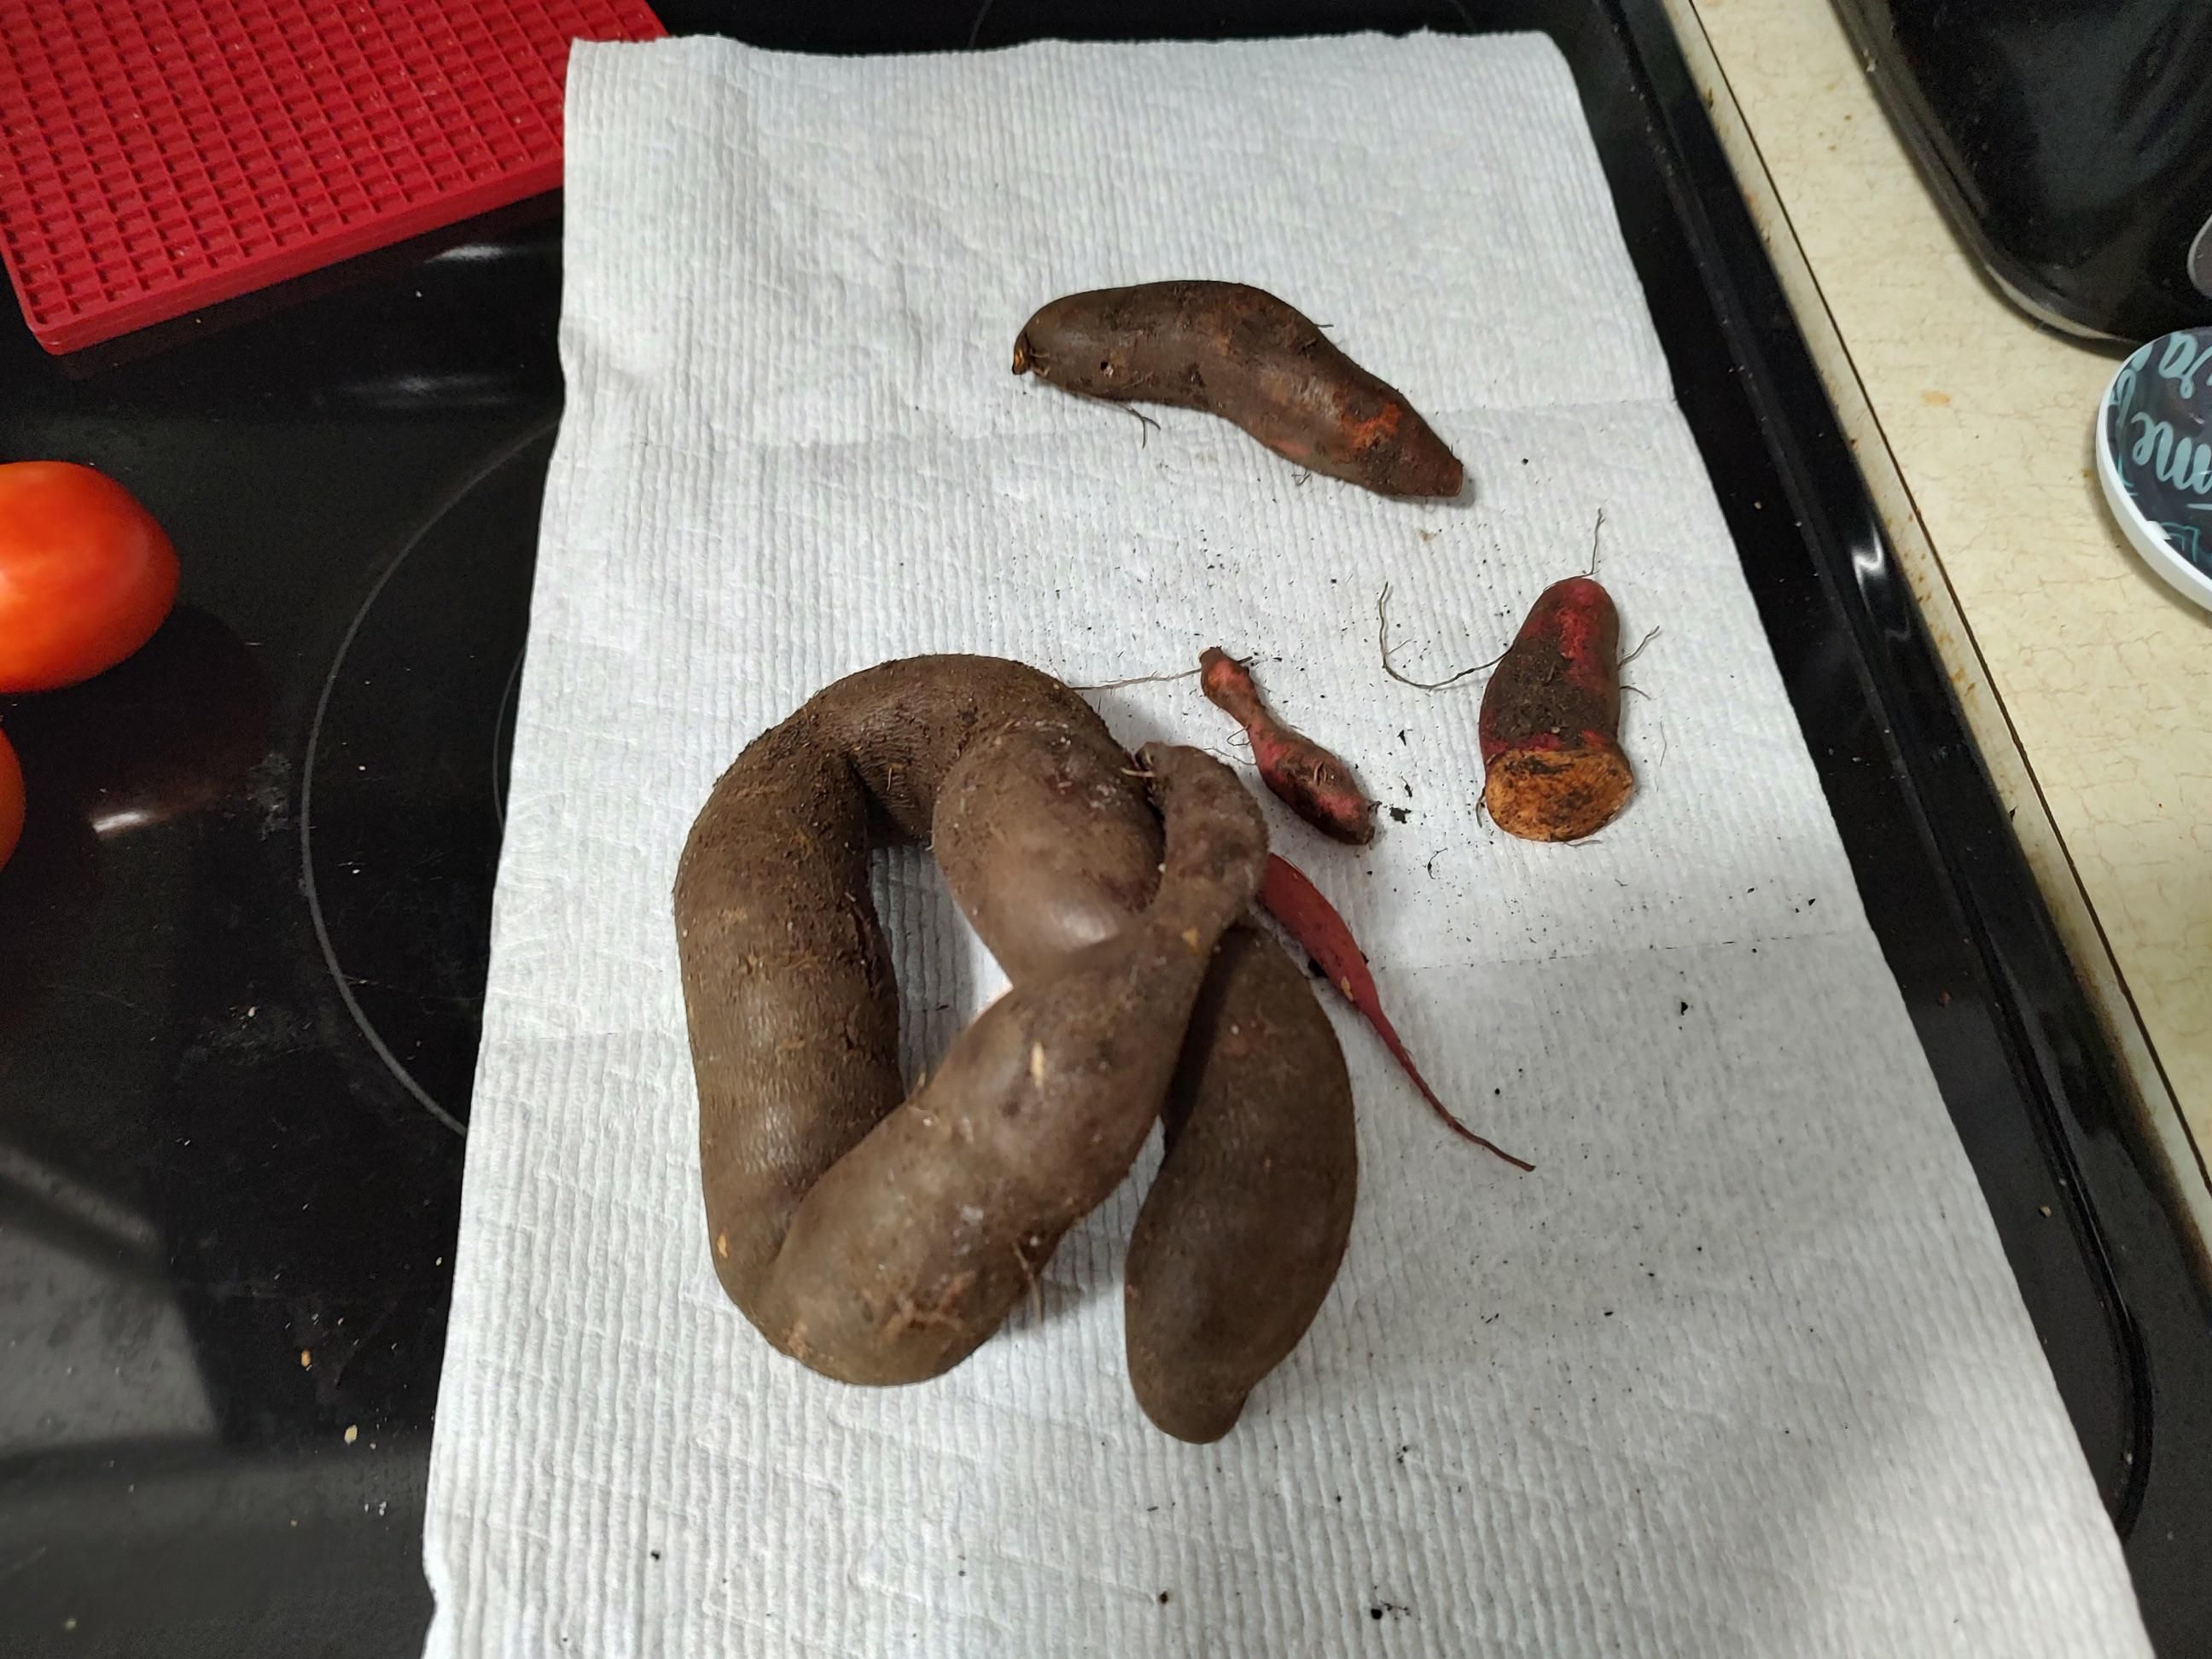 Our sweet potato harvest this year…